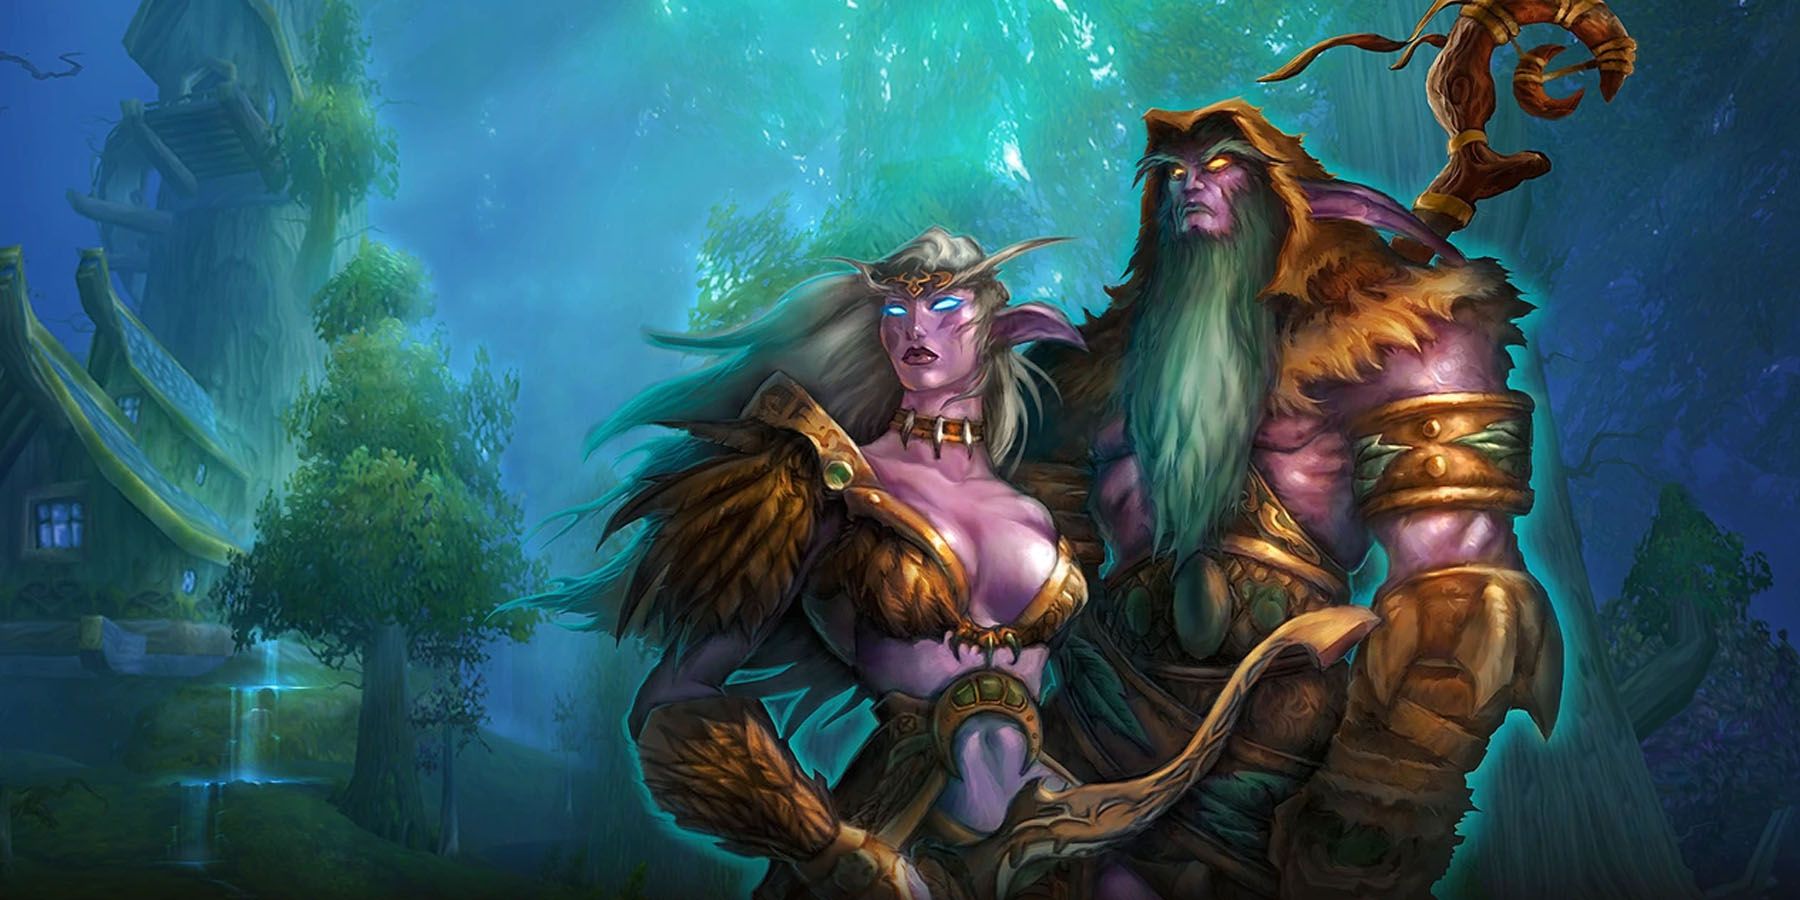 Night Elves in the form of Tyrande and Malfurion